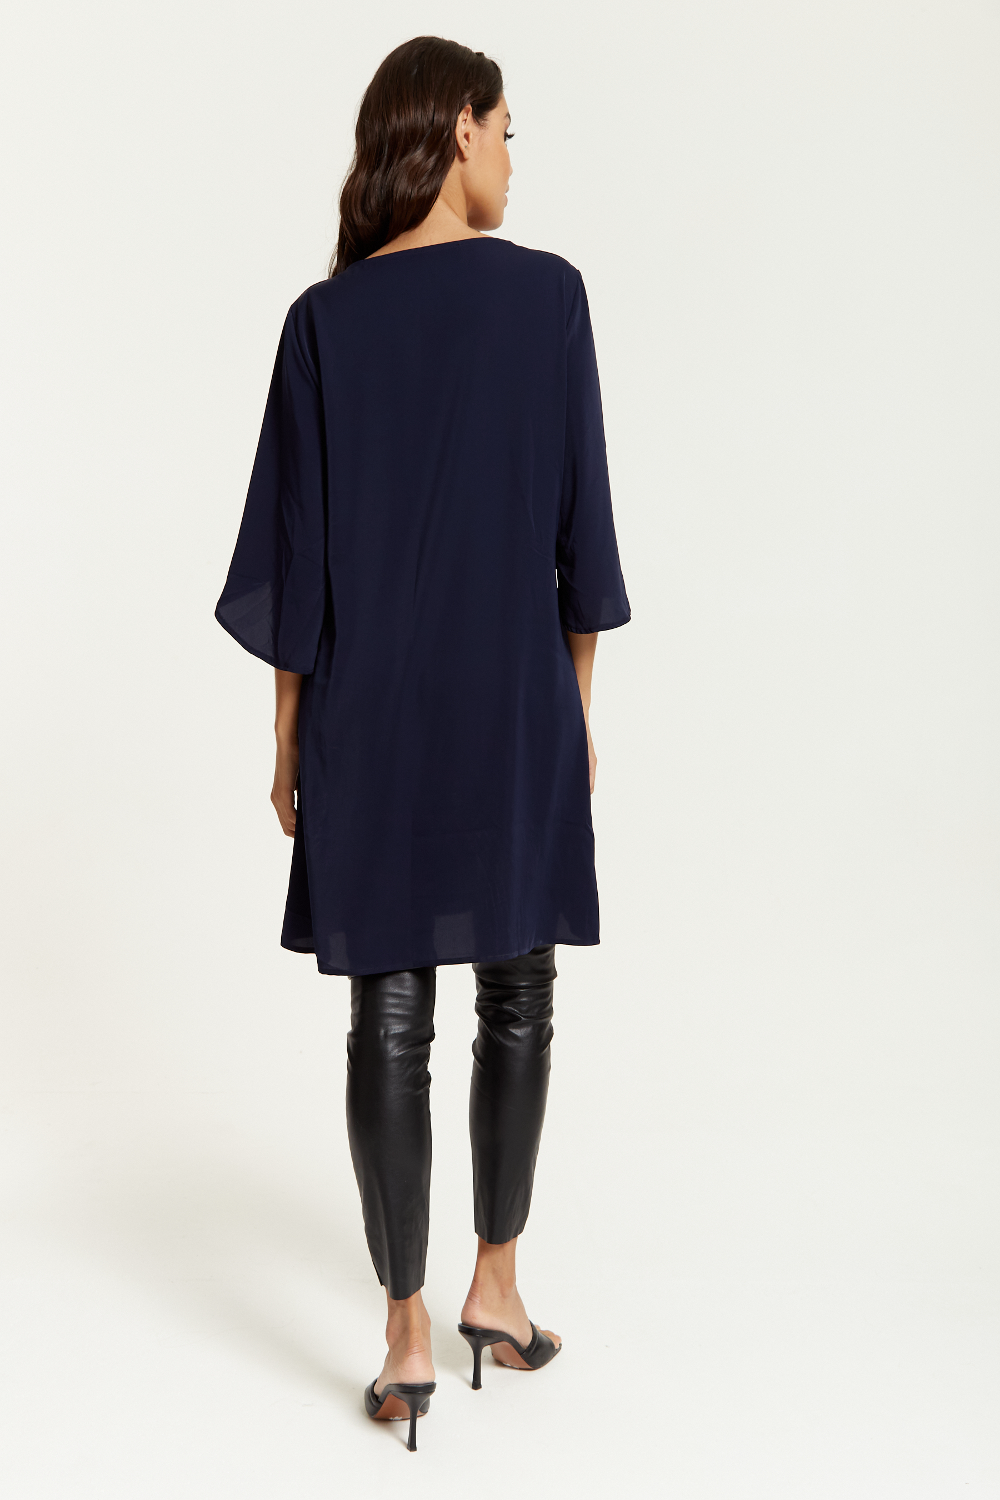 Oversized V Neck Tunic with Split Sleeves in Navy GLR FASHION NETWORKING